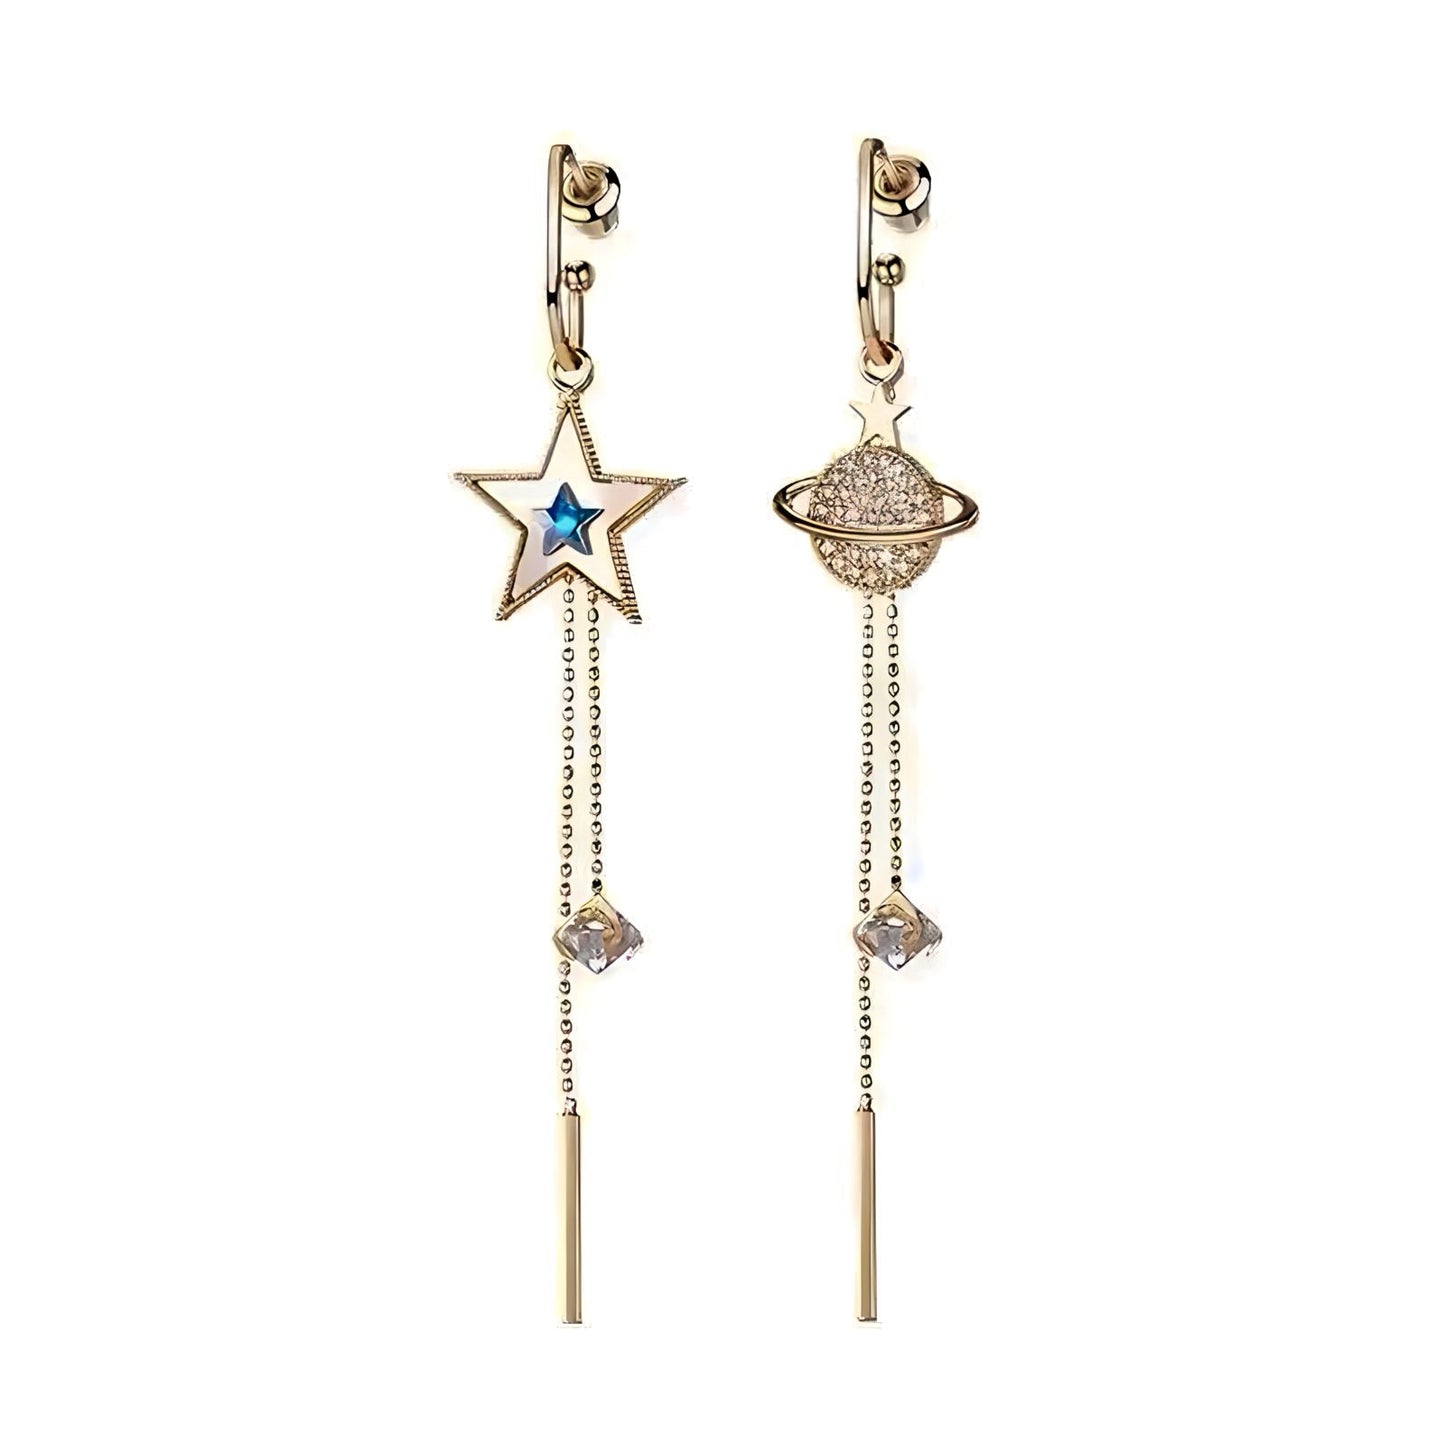 Celestial Drop Earrings | Gold Starry Planets, Saturn Design